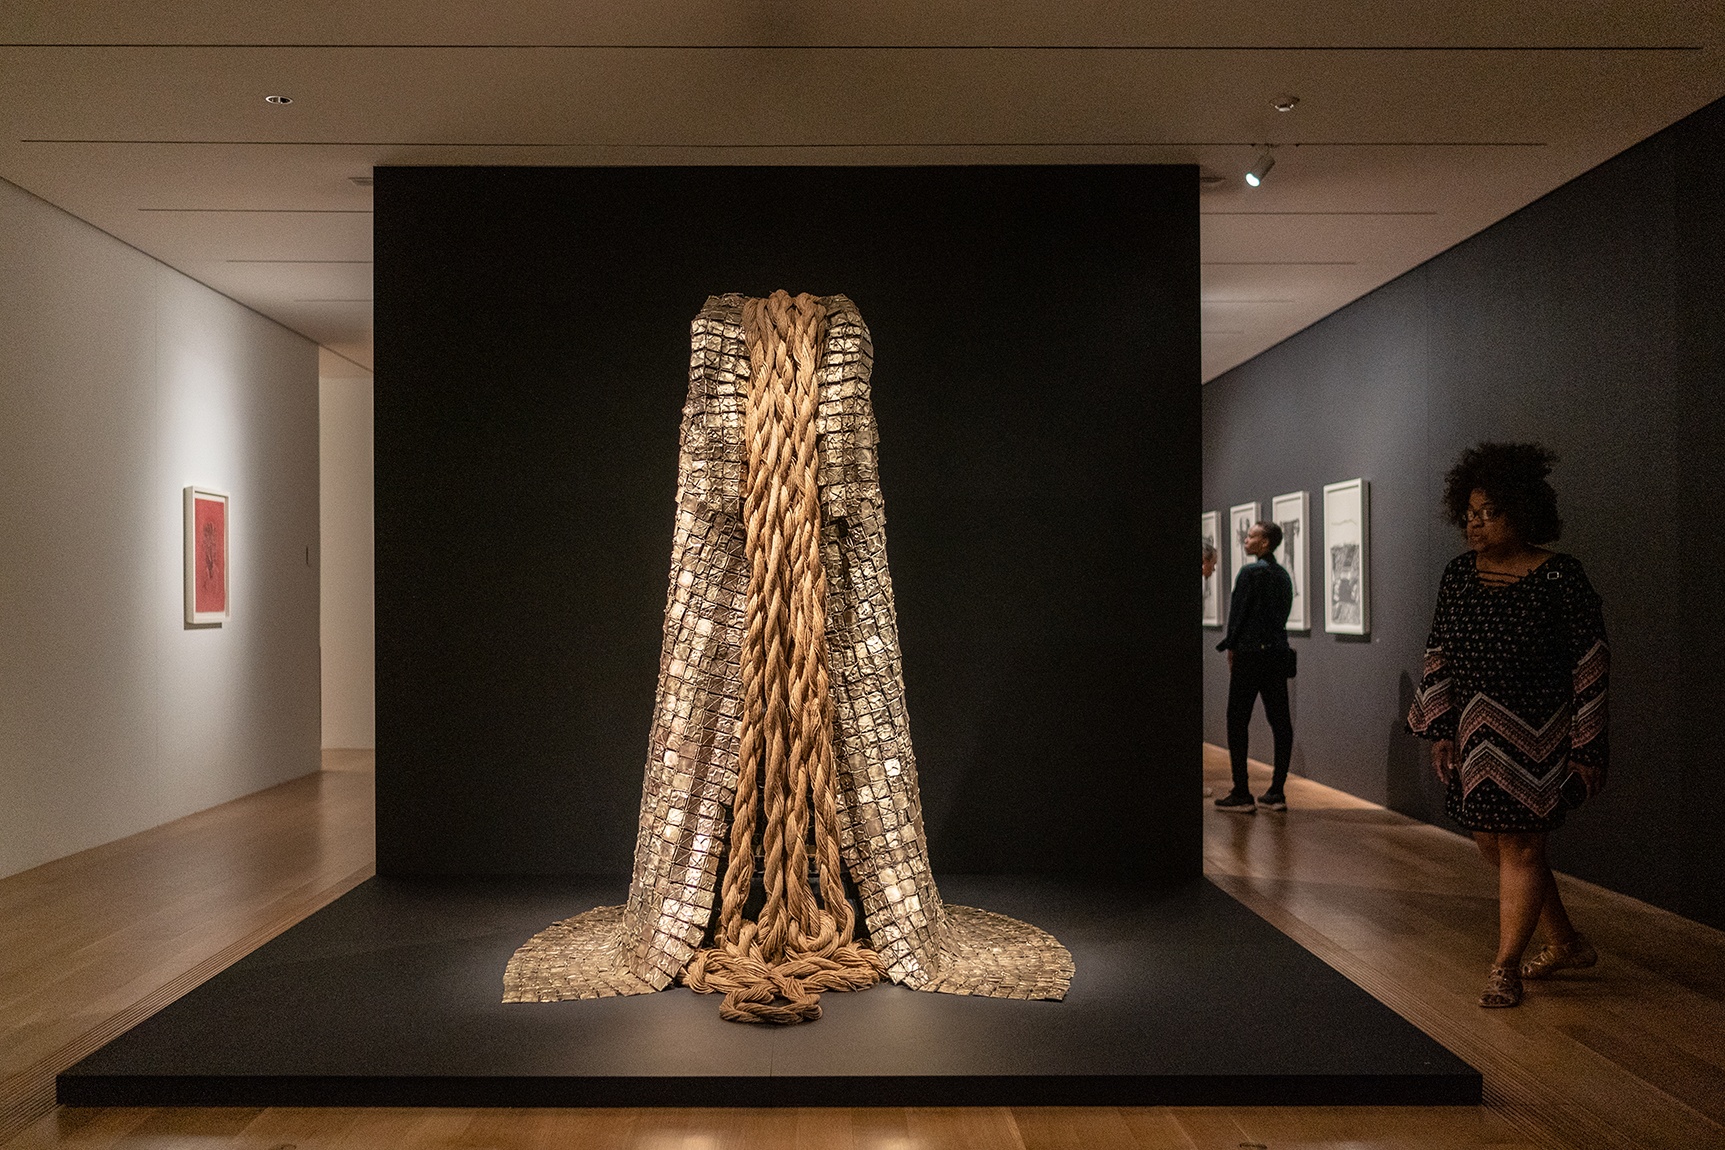 Opening reception of "Barbara Chase-Riboud" Monumentale: "The Bronzes" at the Pulitzer Arts Foundation